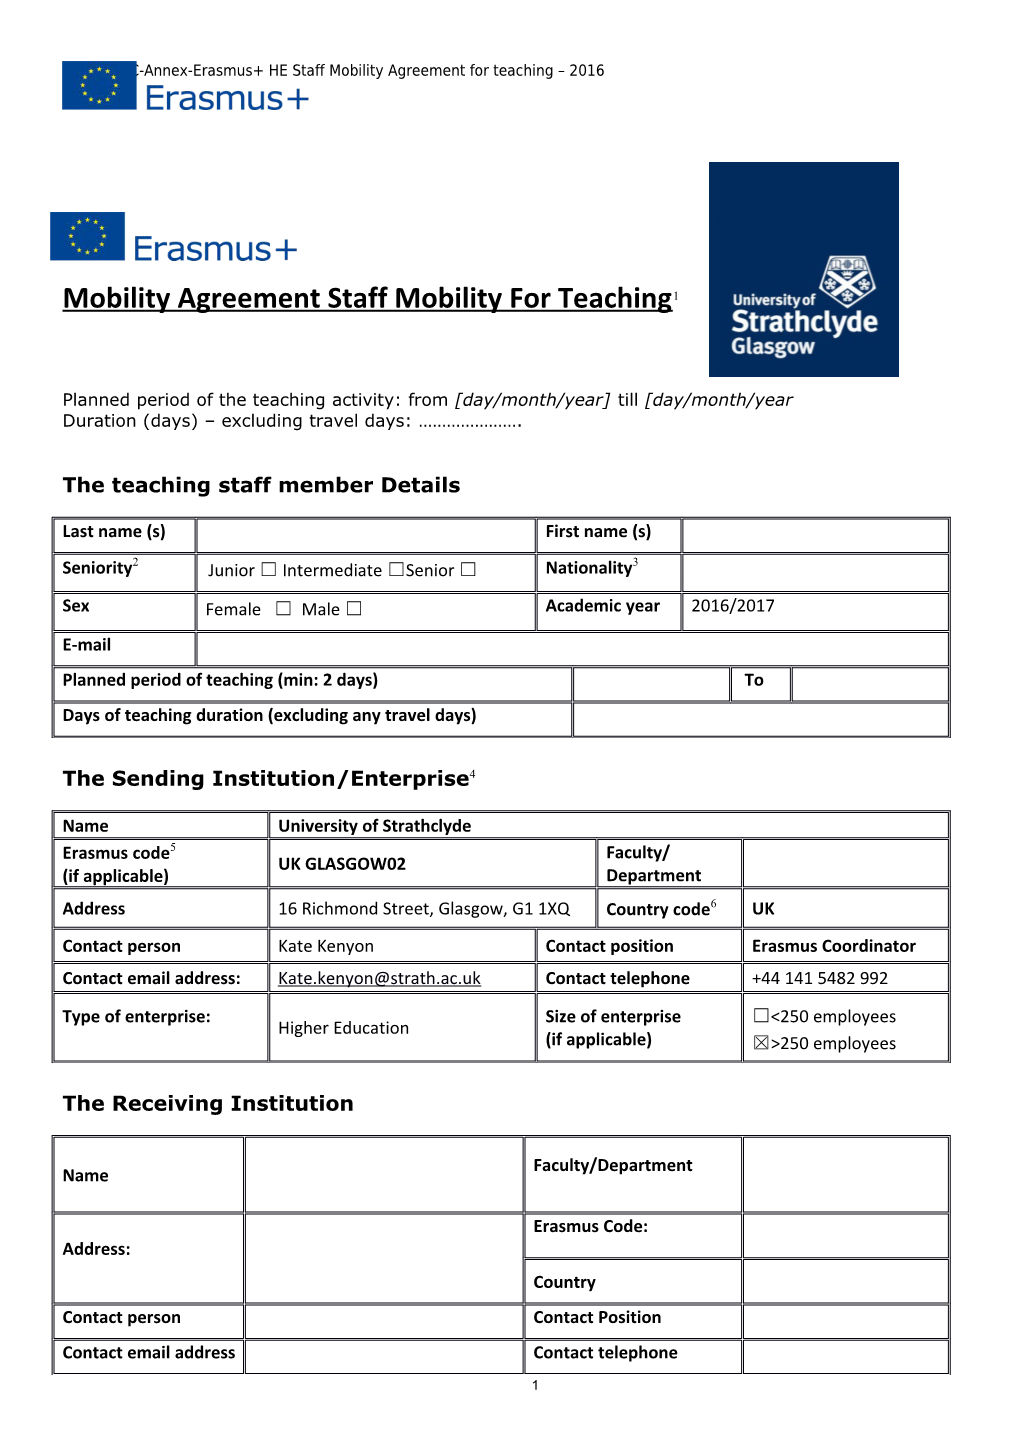 Gfna-II.7-C-Annex-Erasmus+ HE Staff Mobility Agreement for Teaching 2016